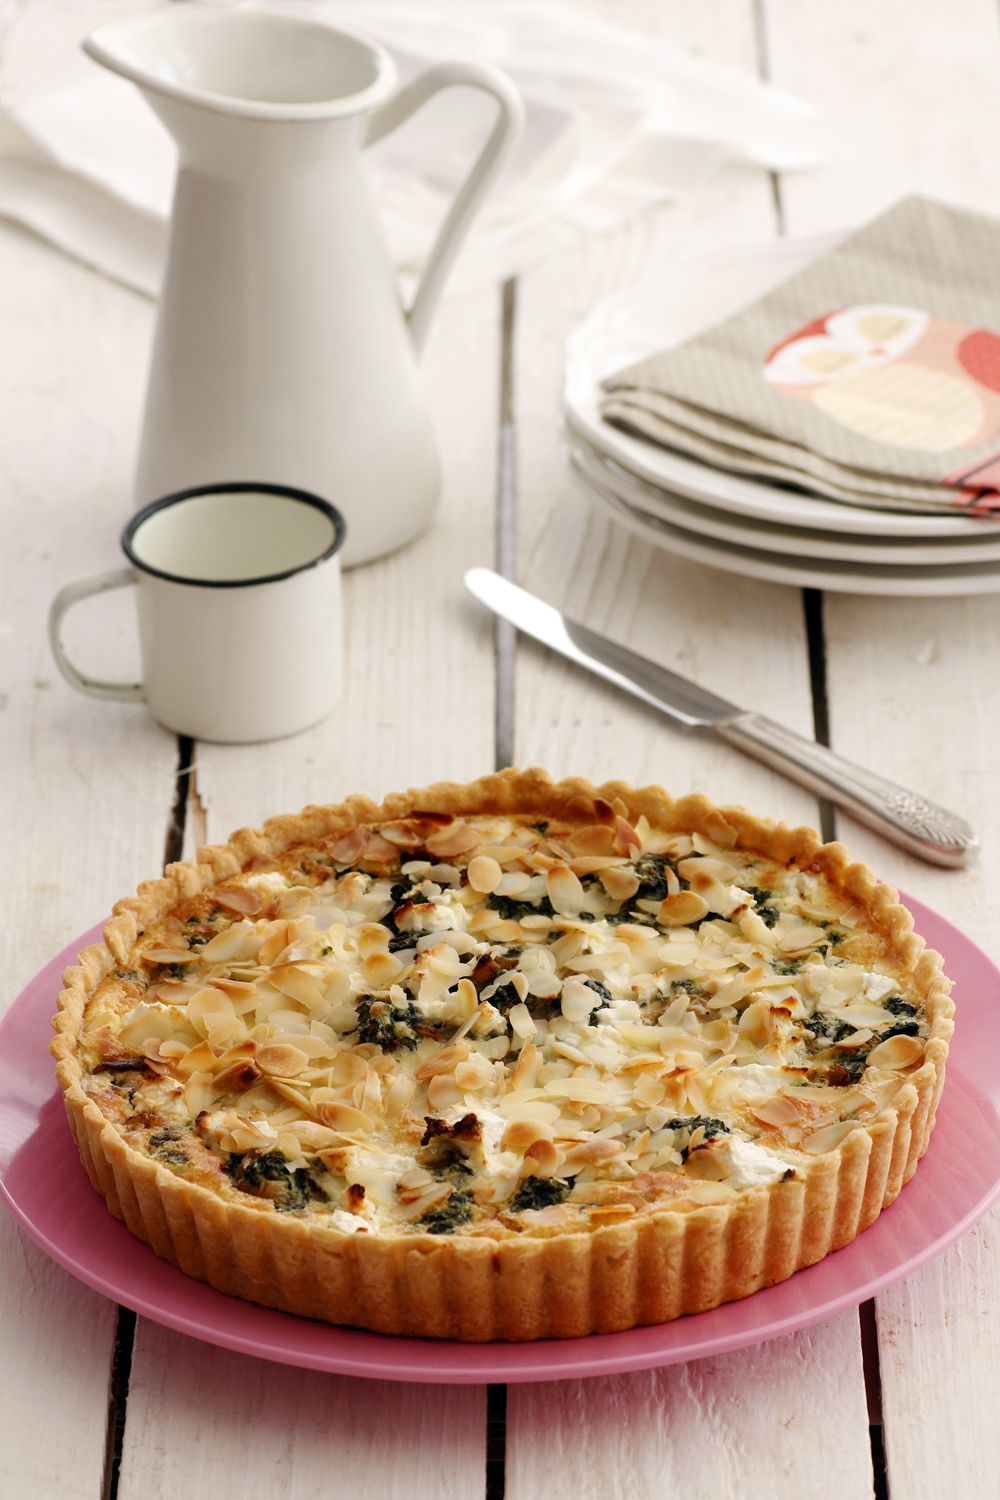 Spinach Quiche with Feta Cheese and Almond